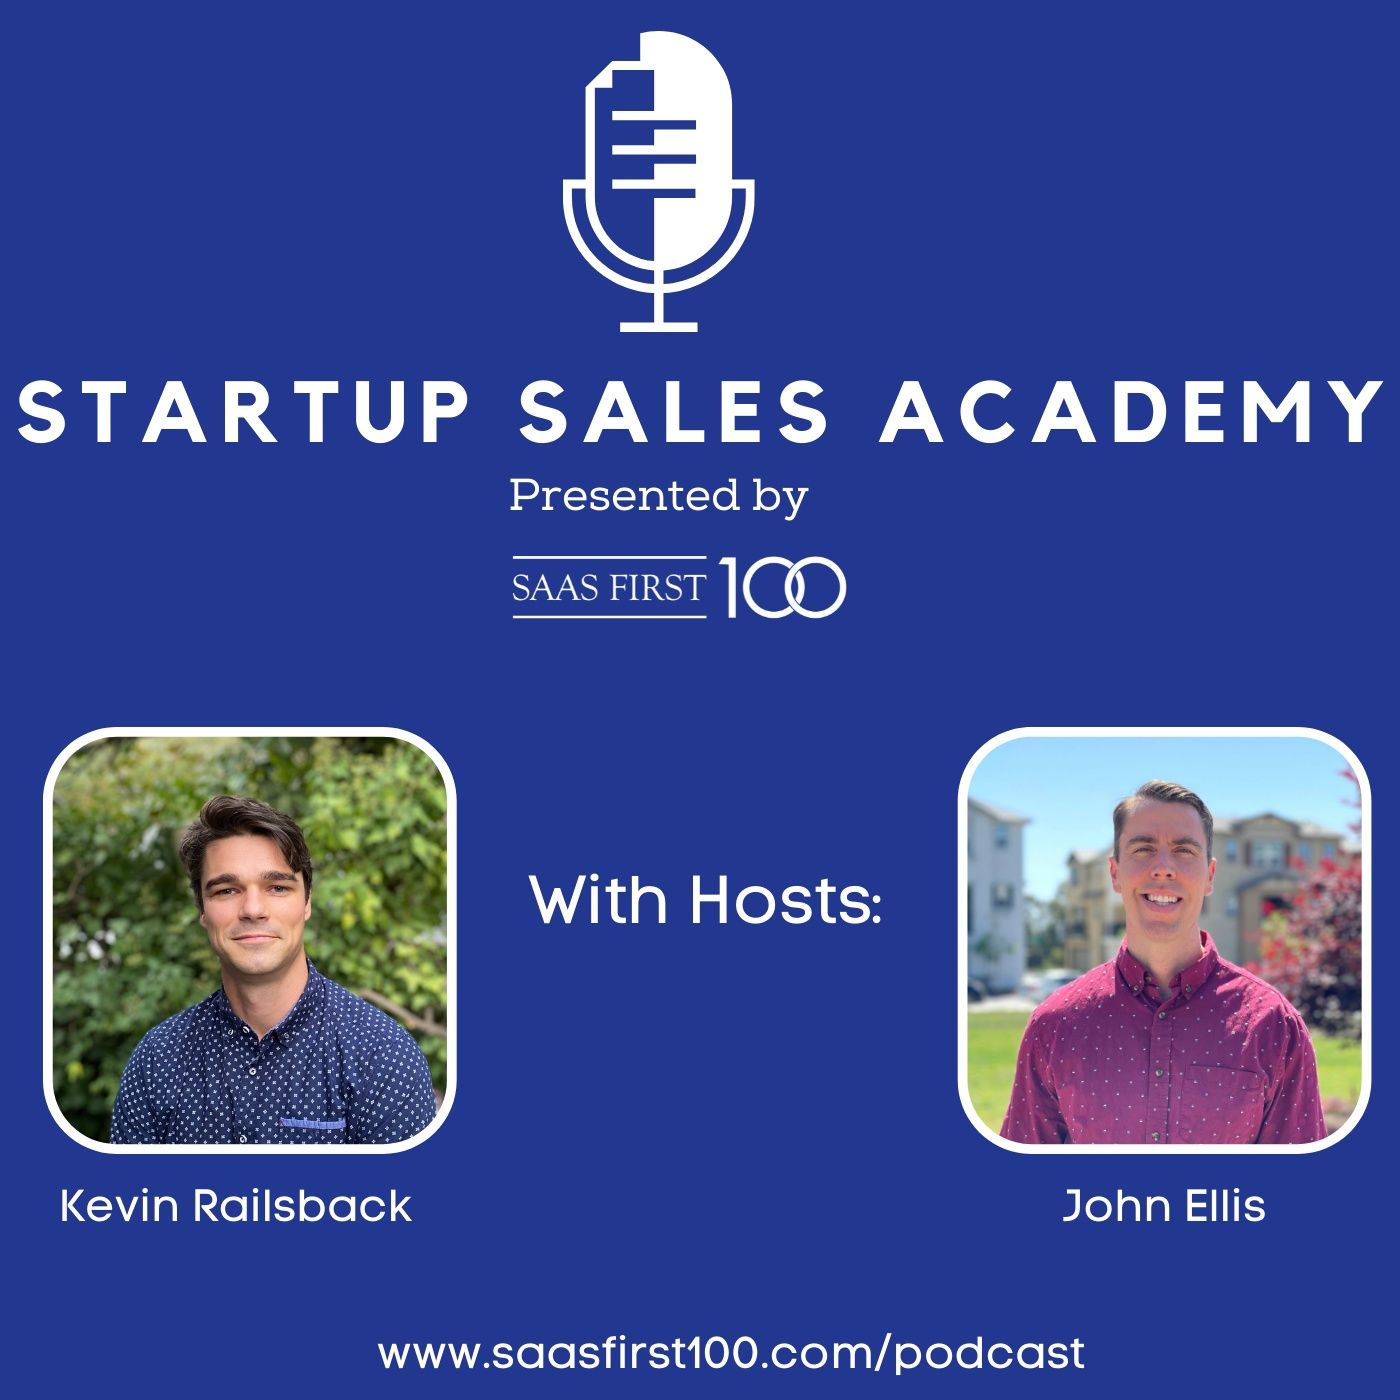 Startup Sales Academy presented by SaaS First 100